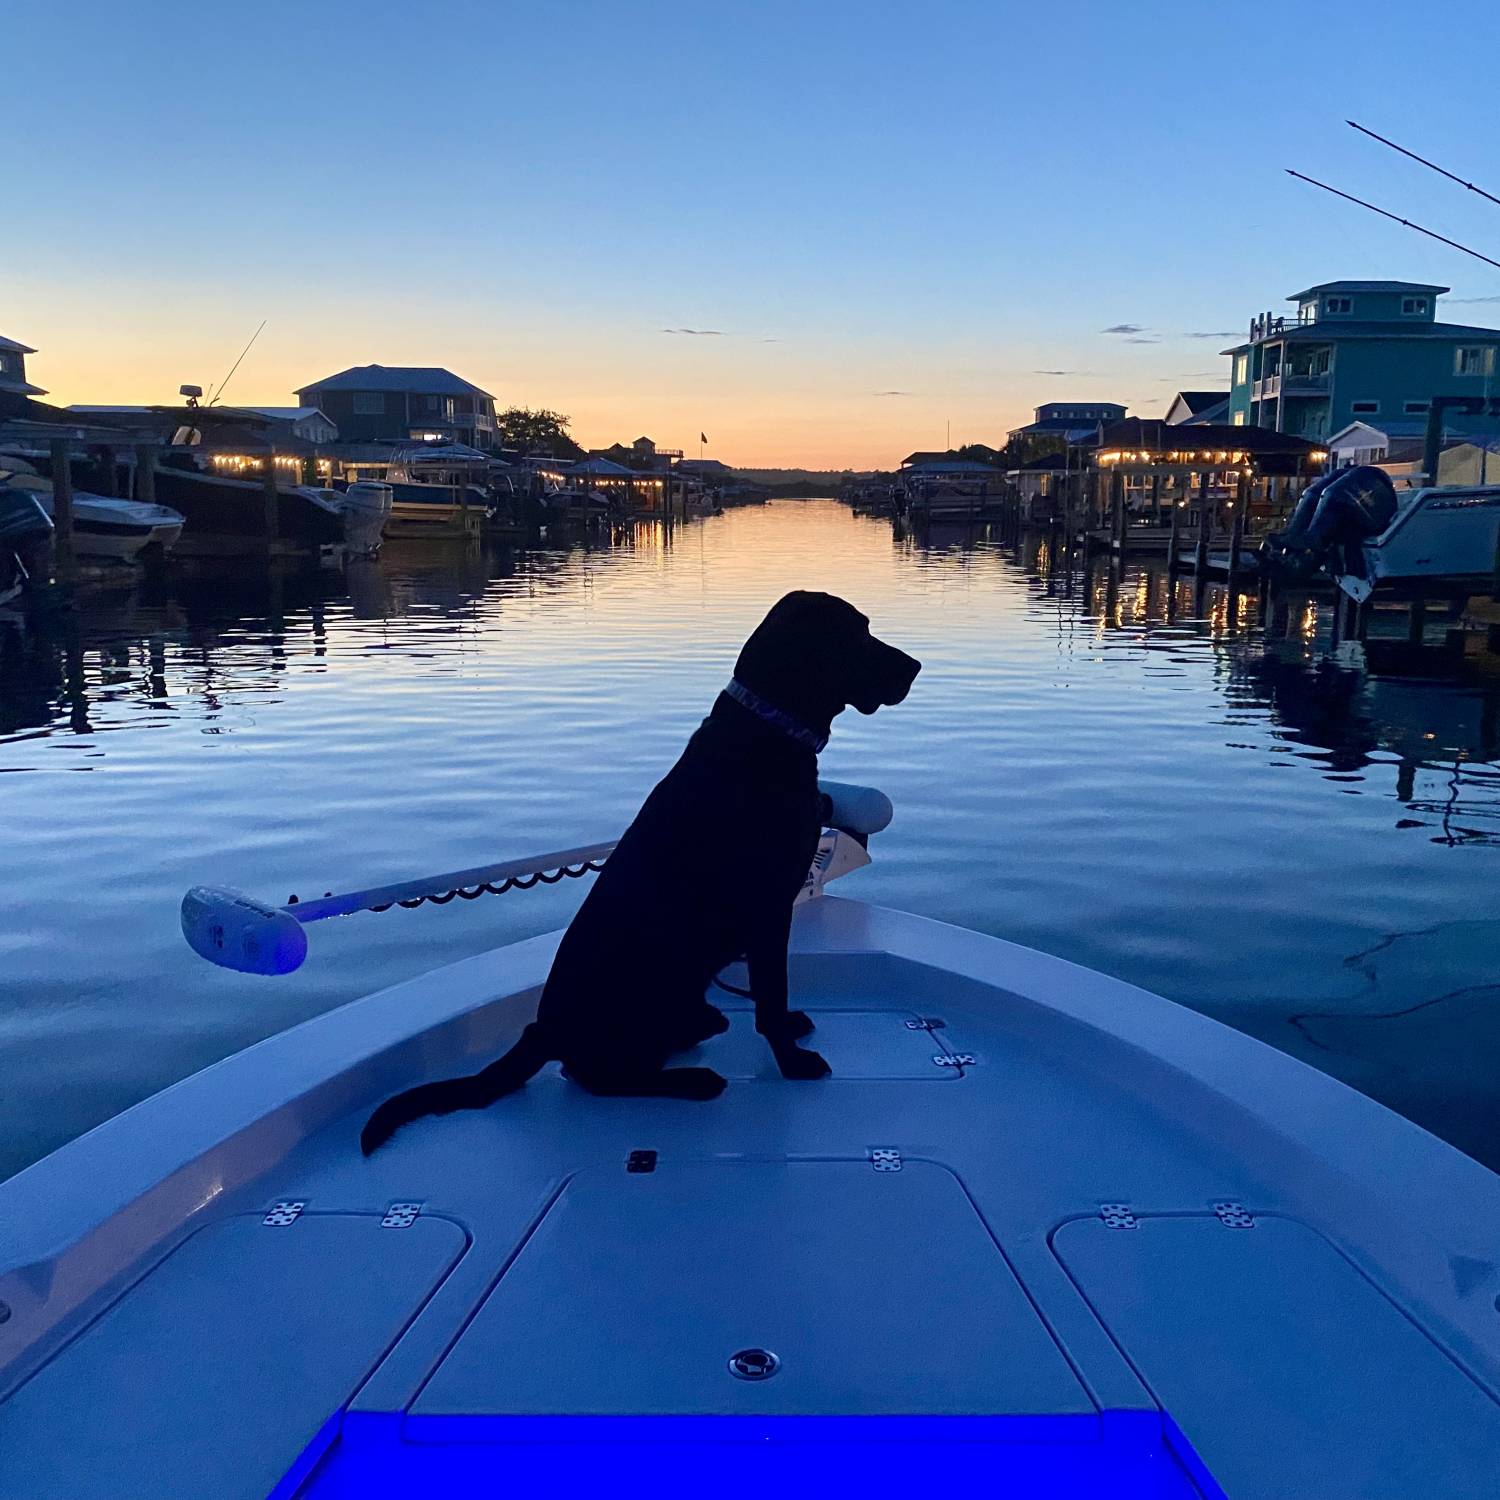 Title: Booze crusin’ Beau - On board their Sportsman Masters 227 Bay Boat - Location: Surf City, NC. Participating in the Photo Contest #SportsmanSeptember